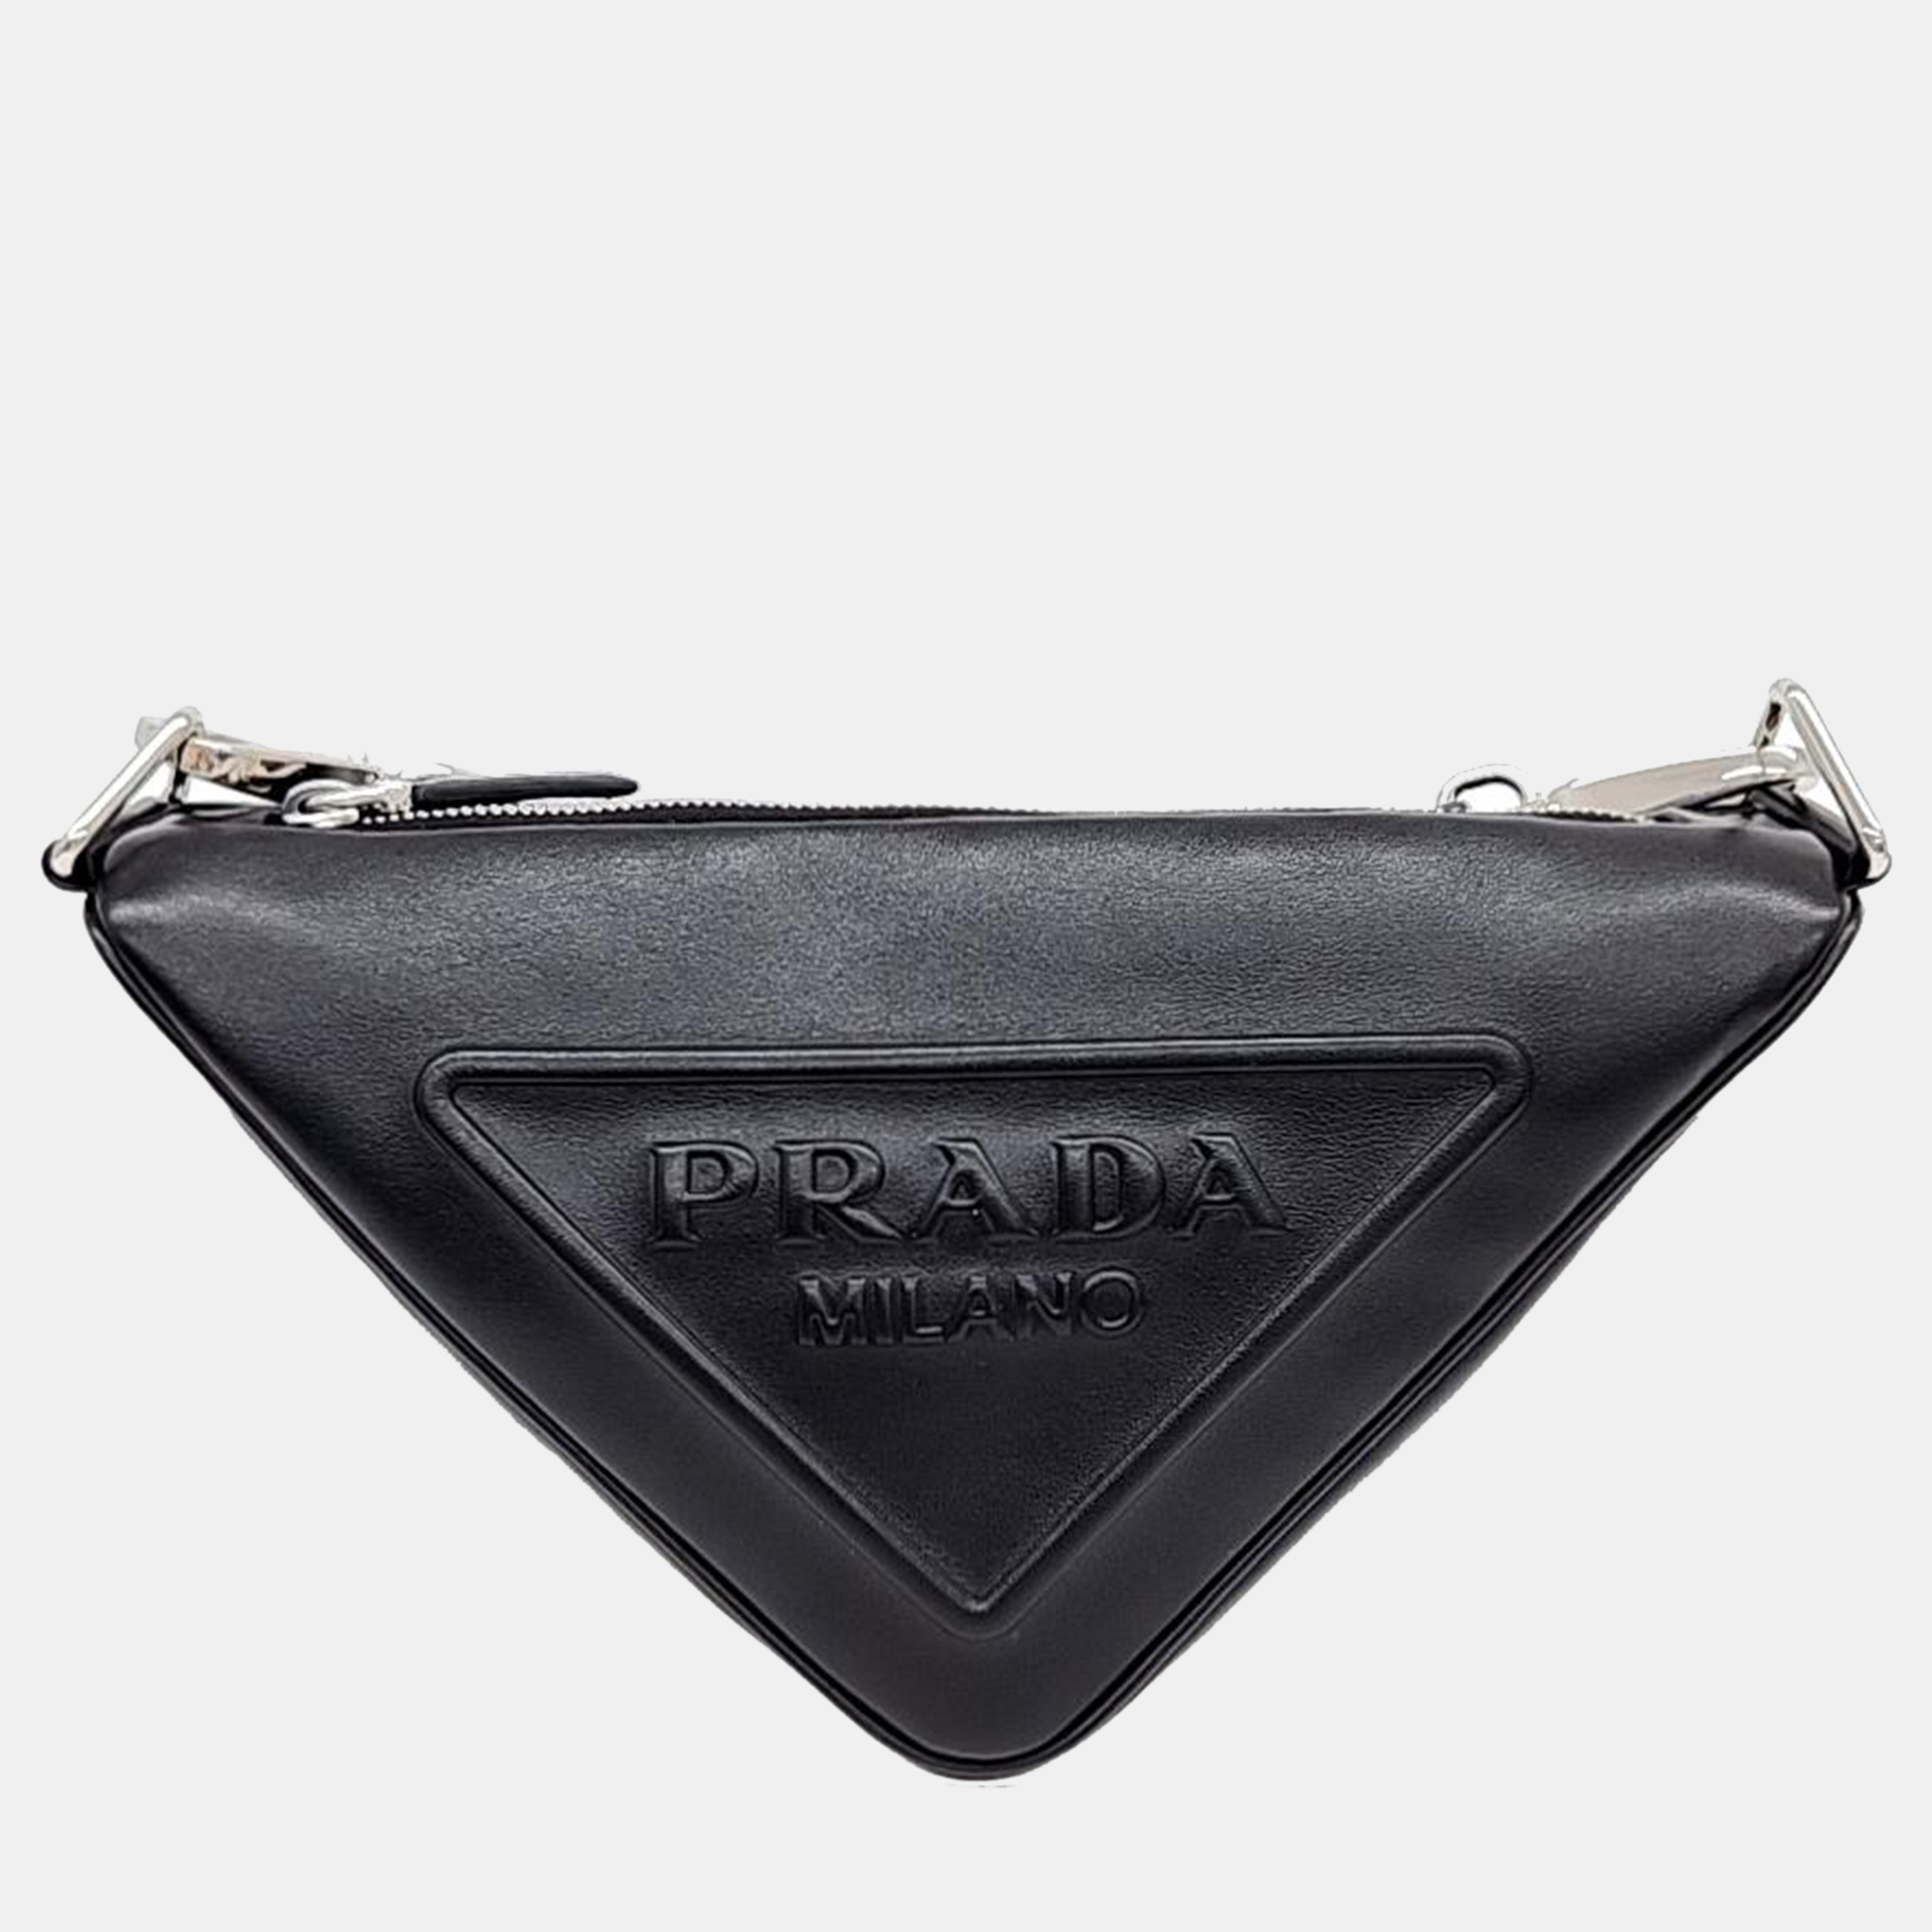 This elegant Prada bag is perfect to enhance your everyday style. It is carefully sewn and finished to be a wonderful investment in your closet.